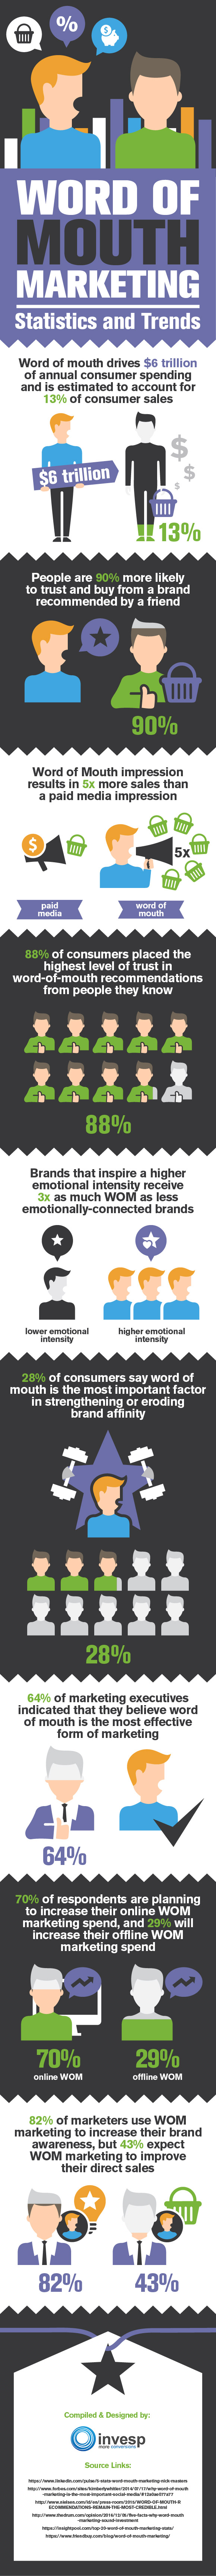 Word of Mouth Marketing - Statistics and Trends